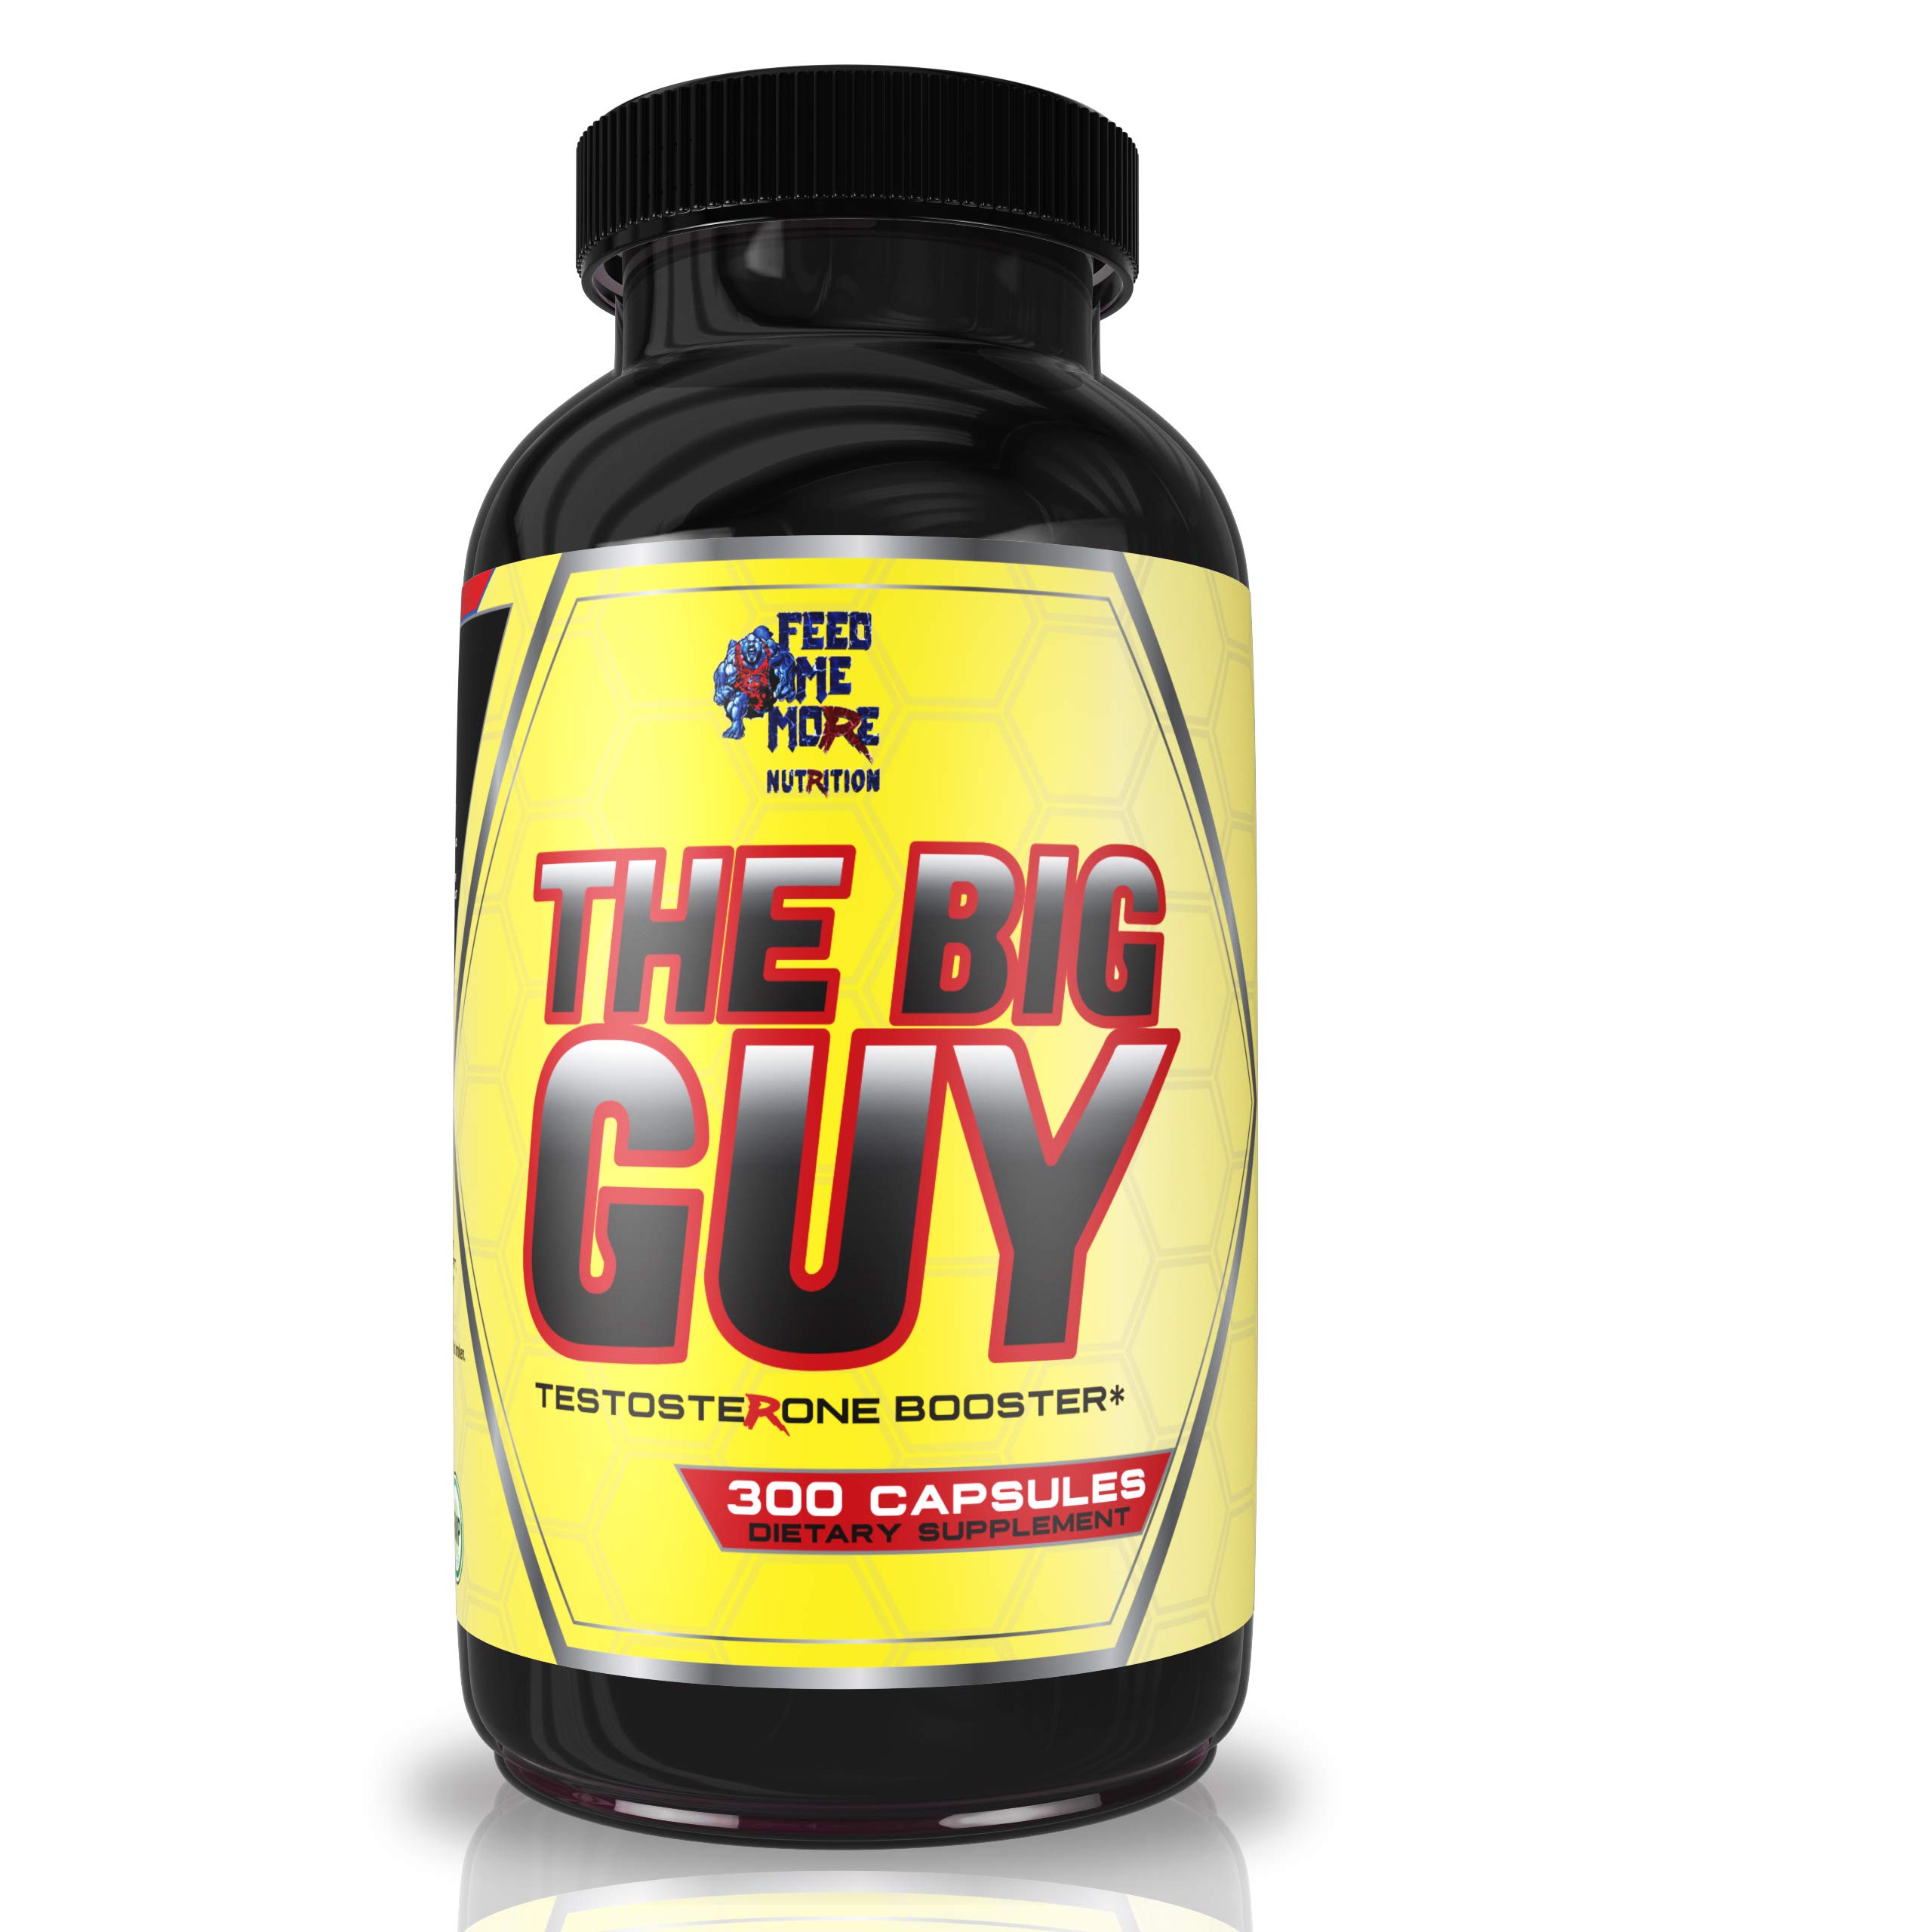 The Big Guy Bodybuilding Testosterone Booster for Men - Vegan-Friendly, Non-GMO Weightlifting Supplement - Naturally Boost Testosterone and Libido ...